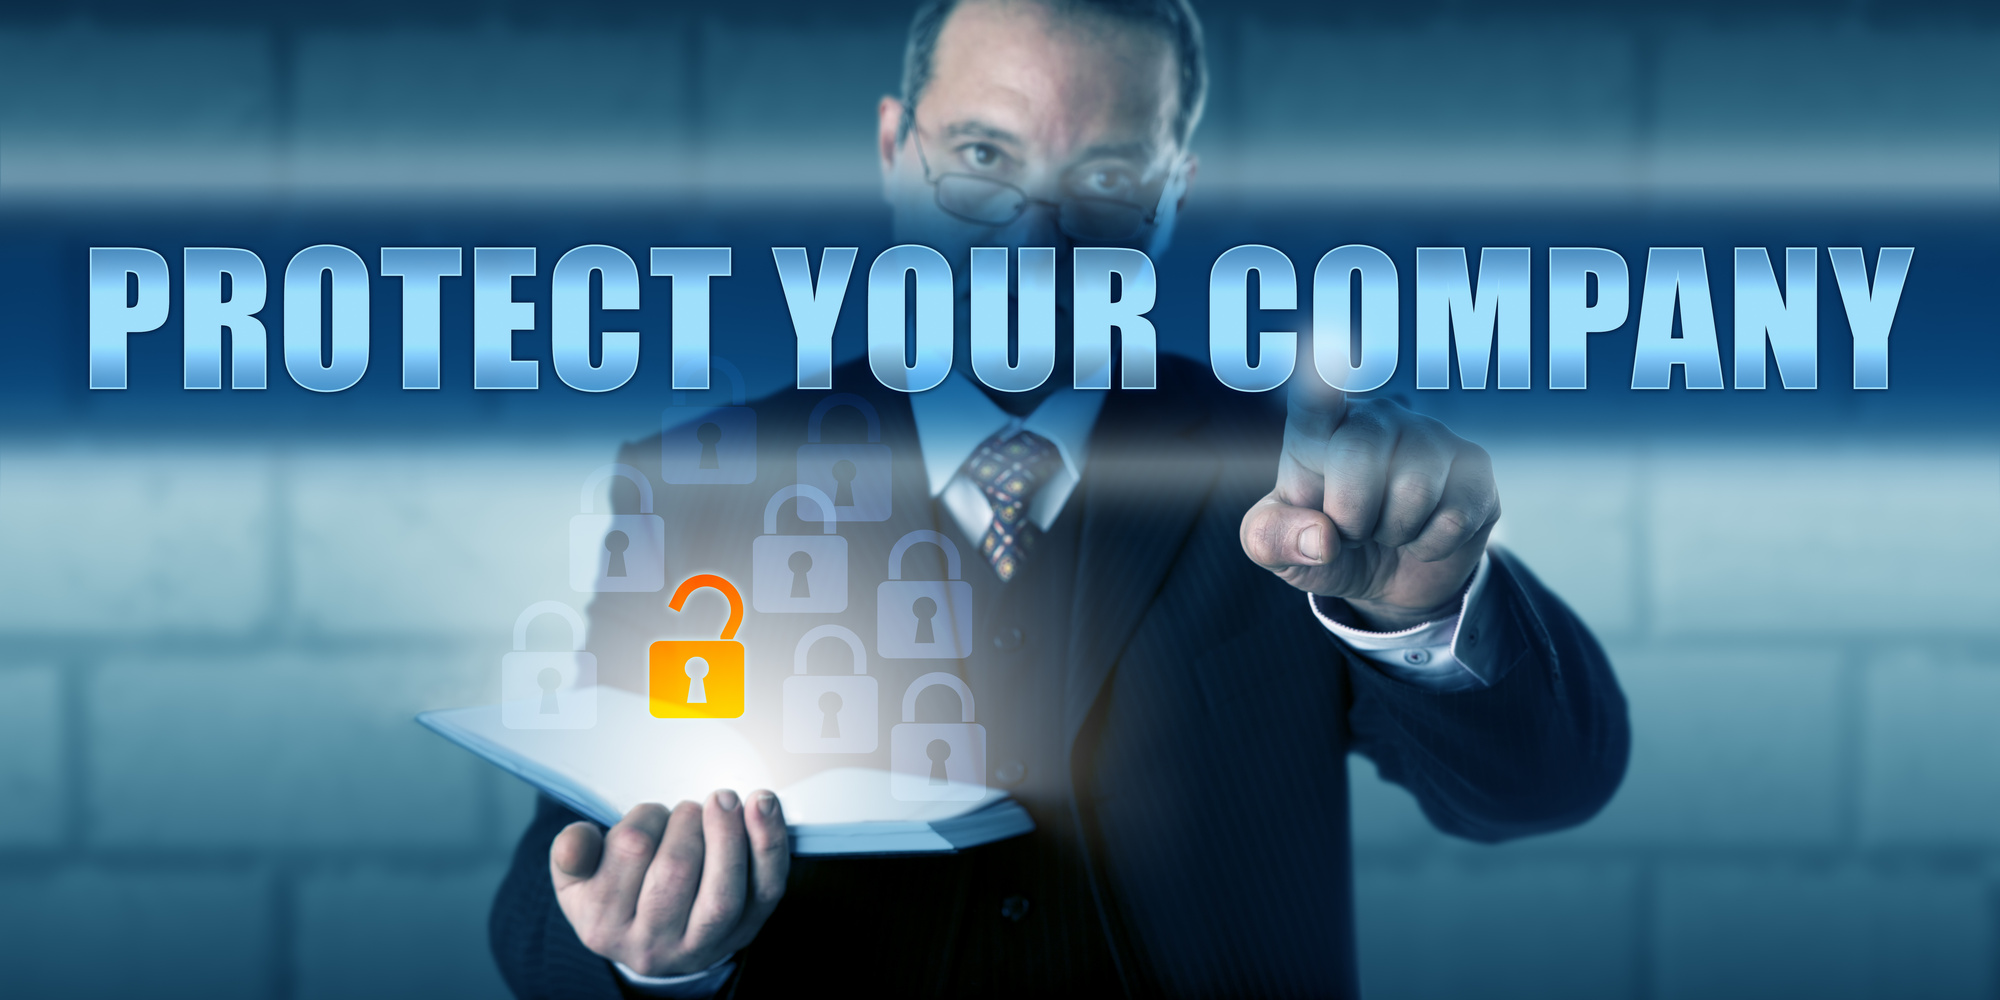 Security Advisor Touching PROTECT YOUR COMPANY